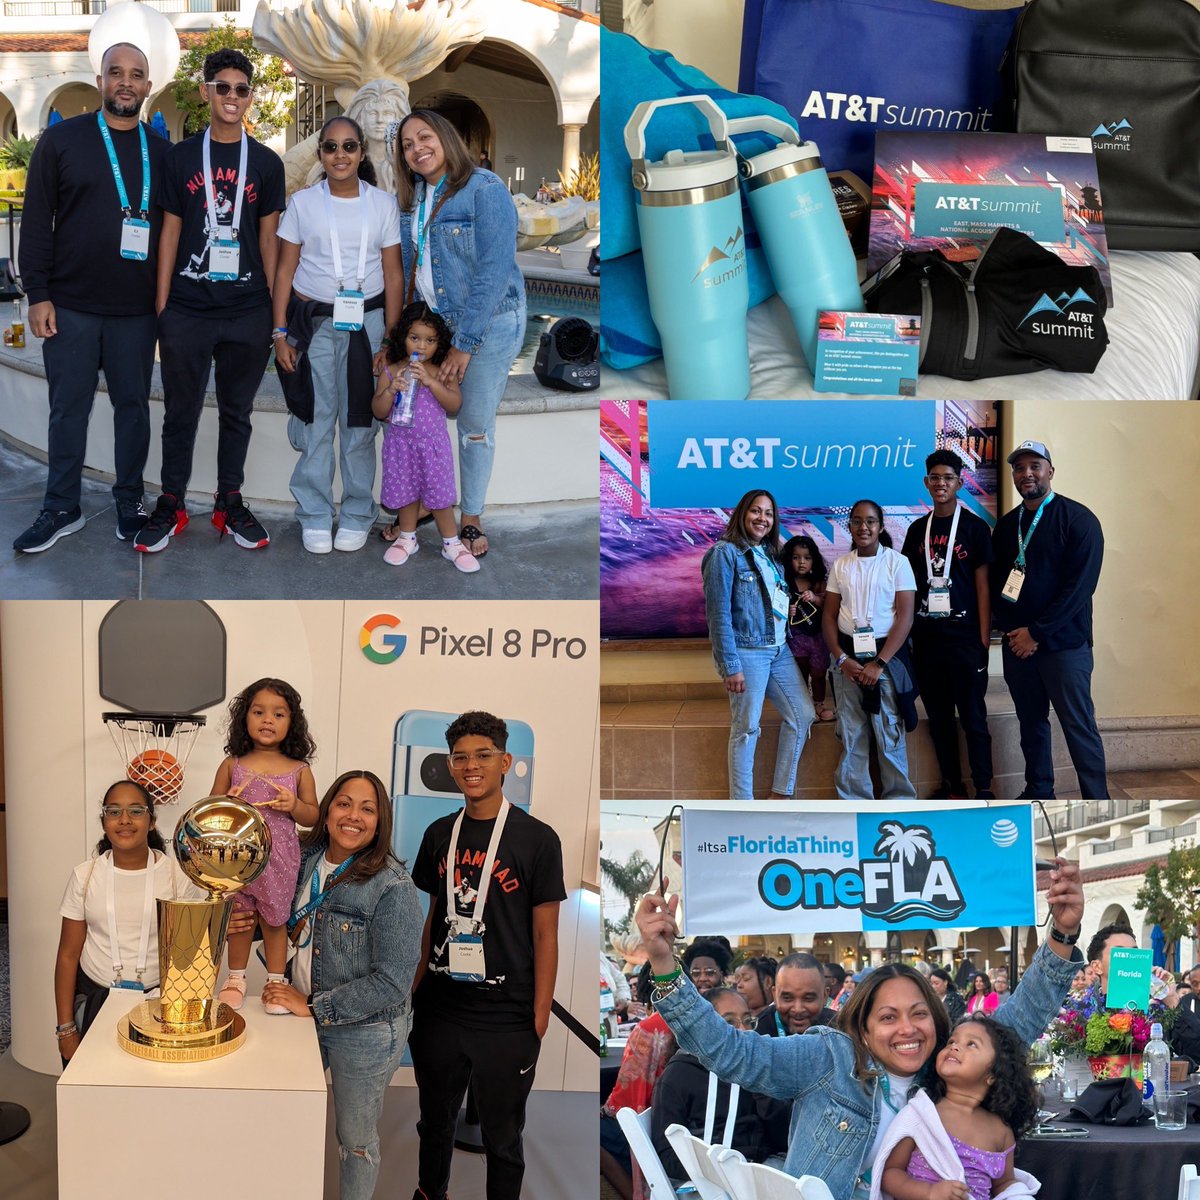 Such an amazing time at #ATTsummit in Huntington Beach! Got the chance to connect with some great leaders. Such a great experience- Truly Blessed! #OneFLA 😎🌴#LifeAtATT #ItsAFloridaThing #Summit